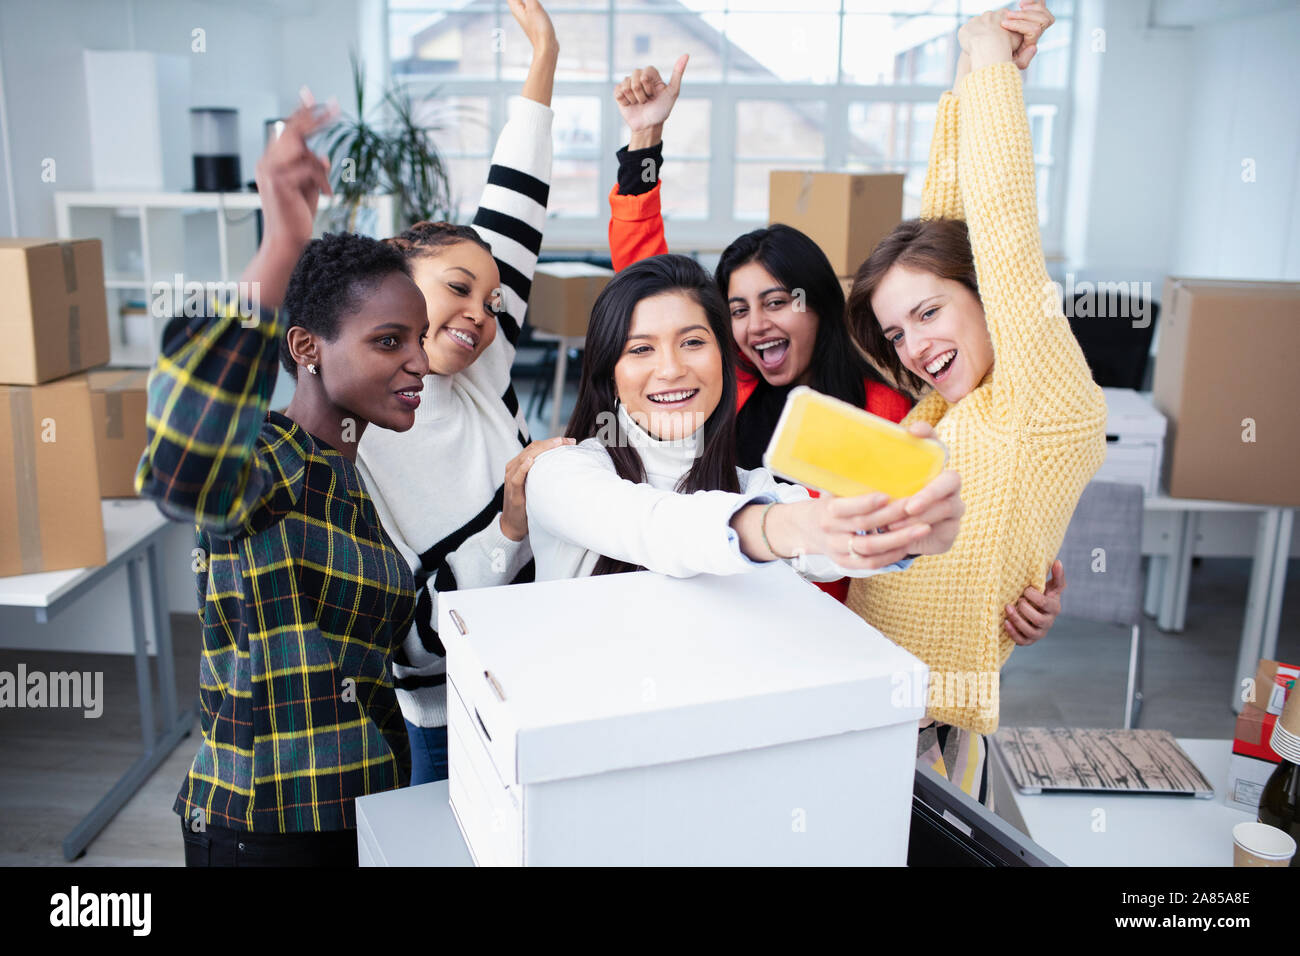 Happy businesswomen moving into new office, taking selfie Stock Photo